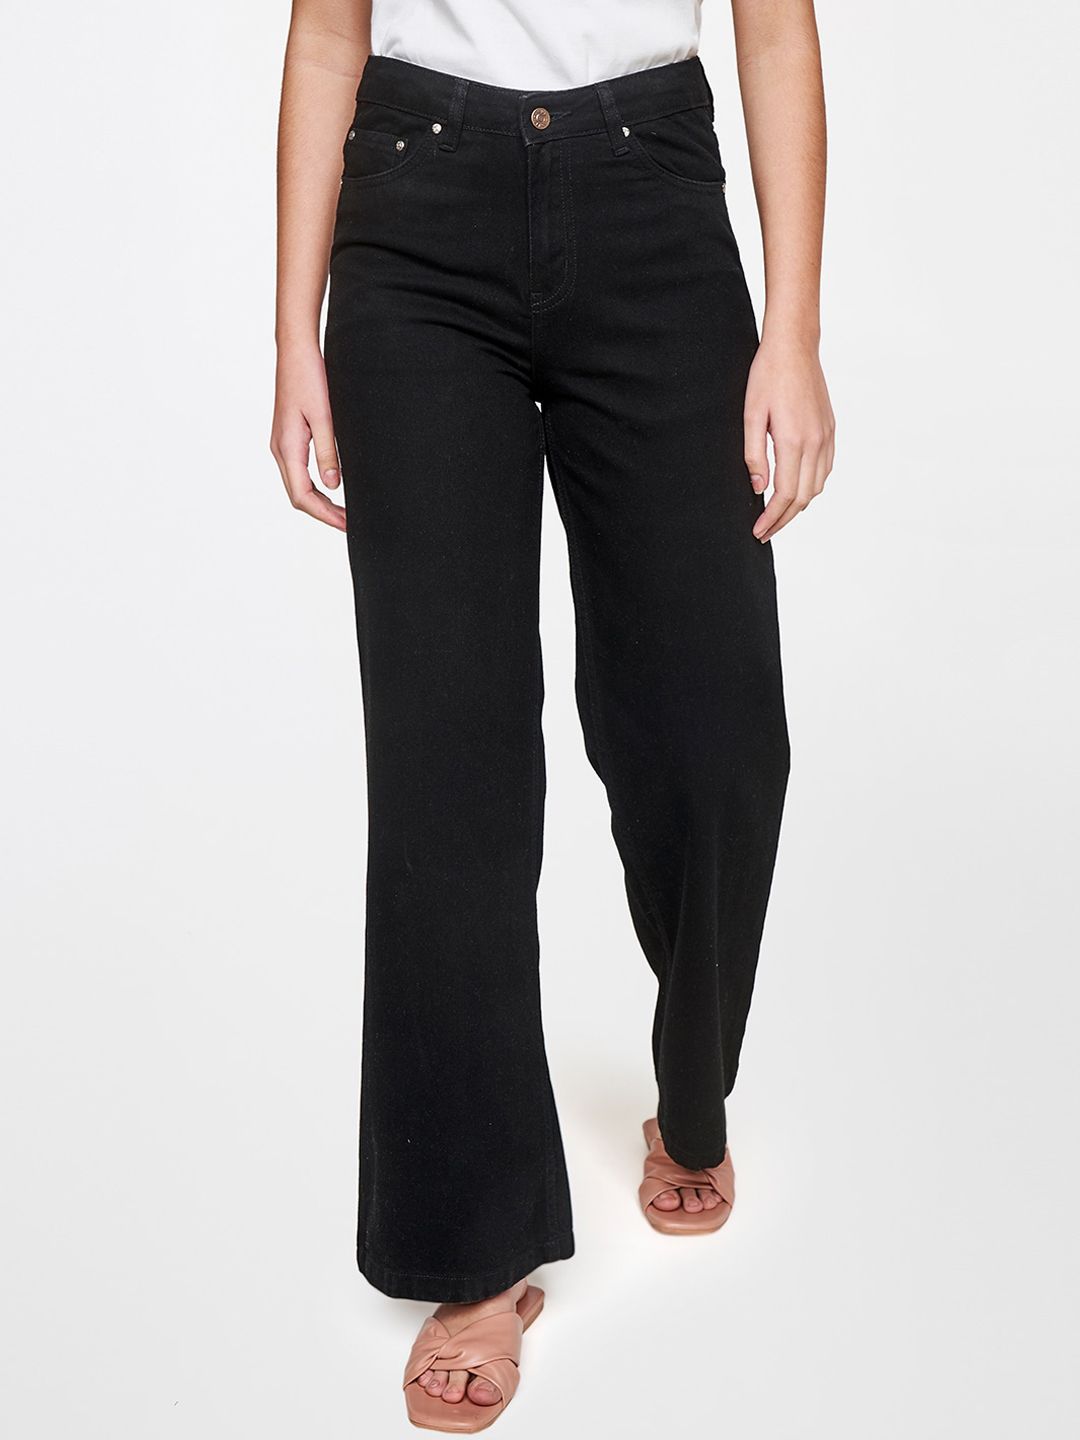 AND Women Black Flared Trousers Price in India